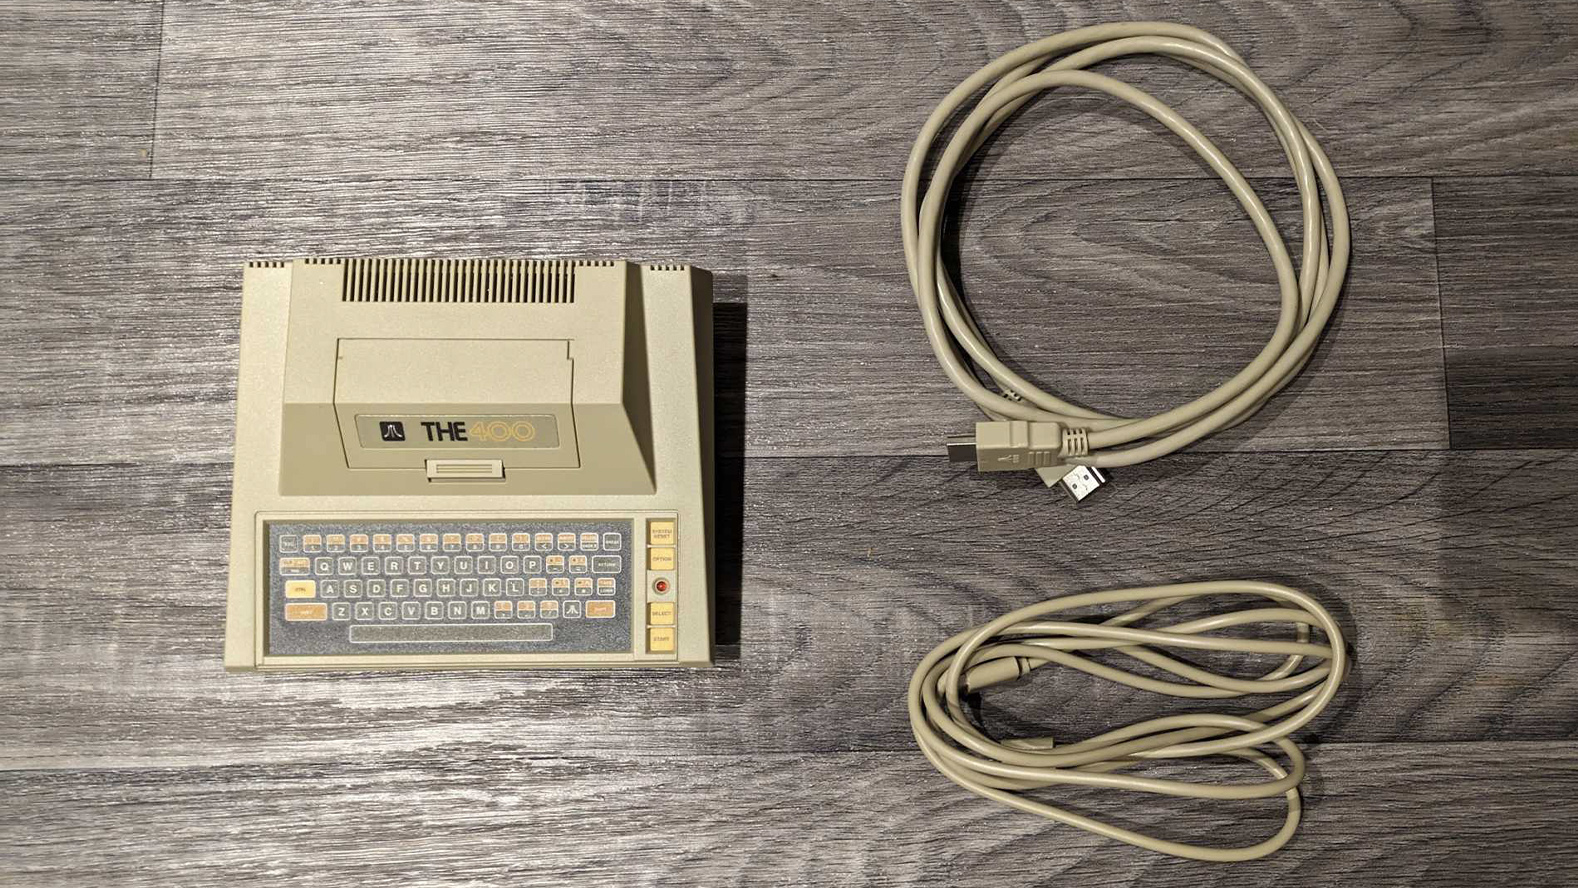 Atari 400 Mini review; a retro console with cables on a wooden floor